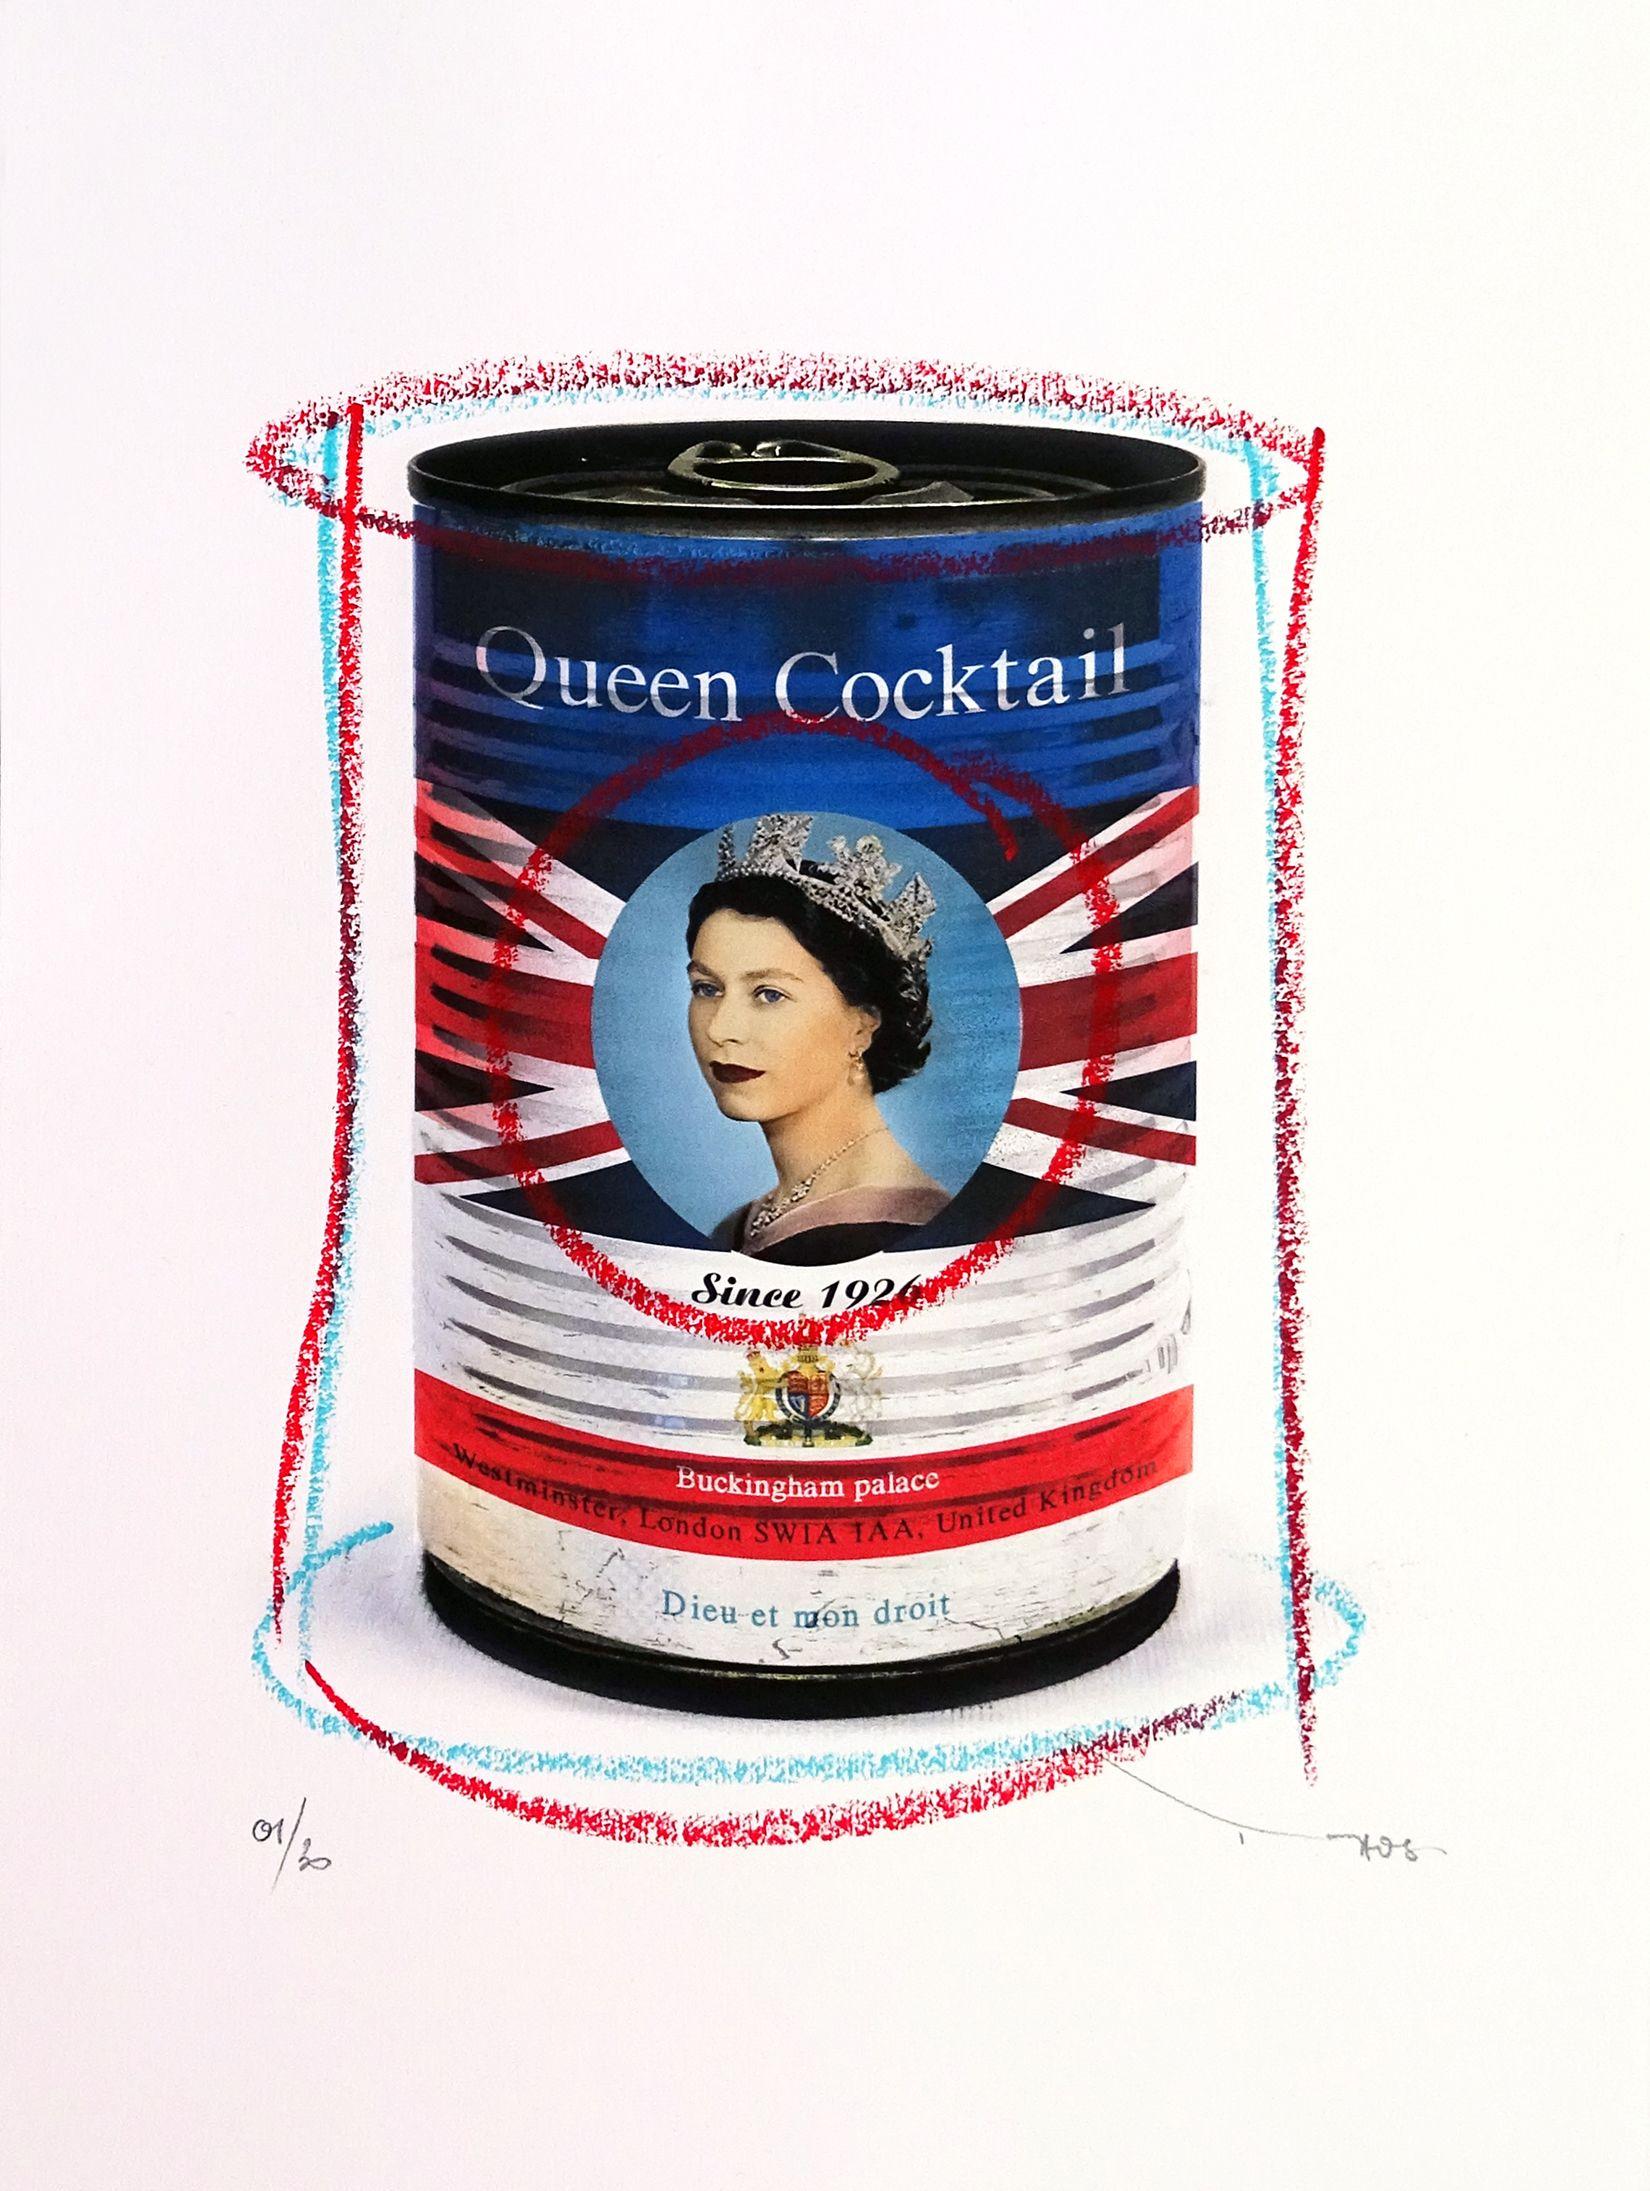 Tehos - Queen Cocktail, Mixed Media on Paper - Mixed Media Art by Tehos Frederic Camilleri